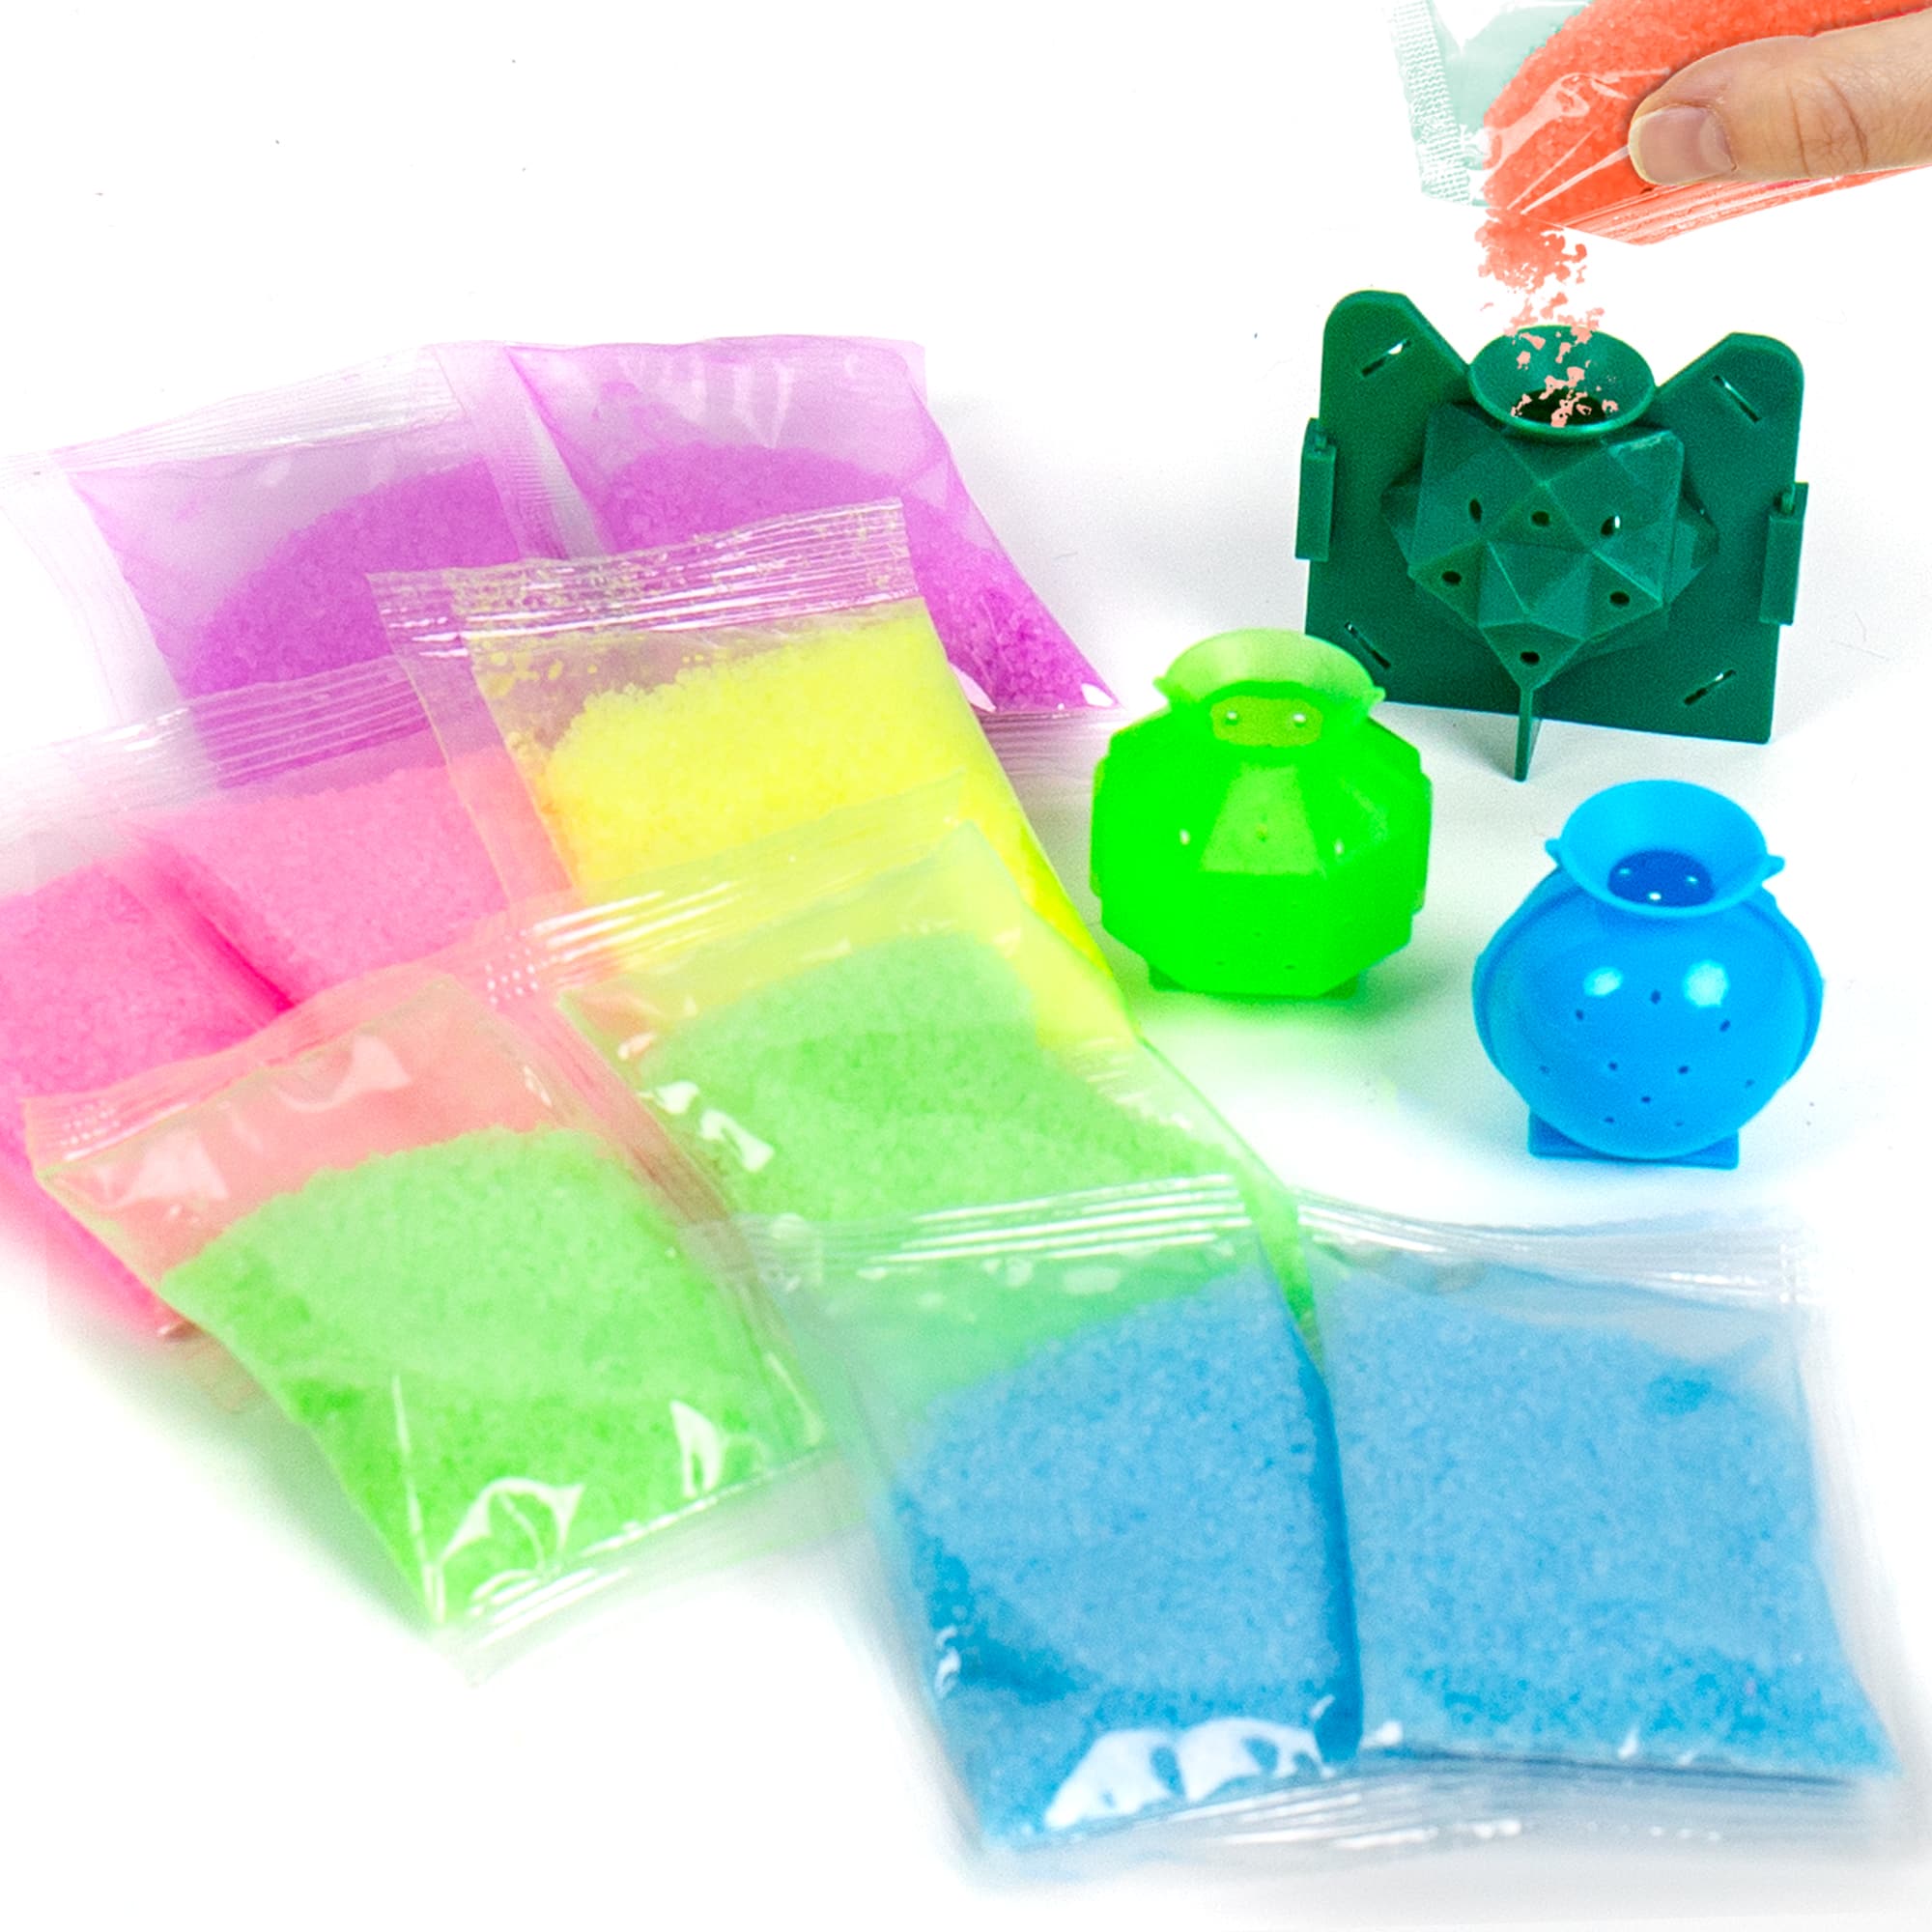 Color Zone&#xAE; Create Your Own Power Balls